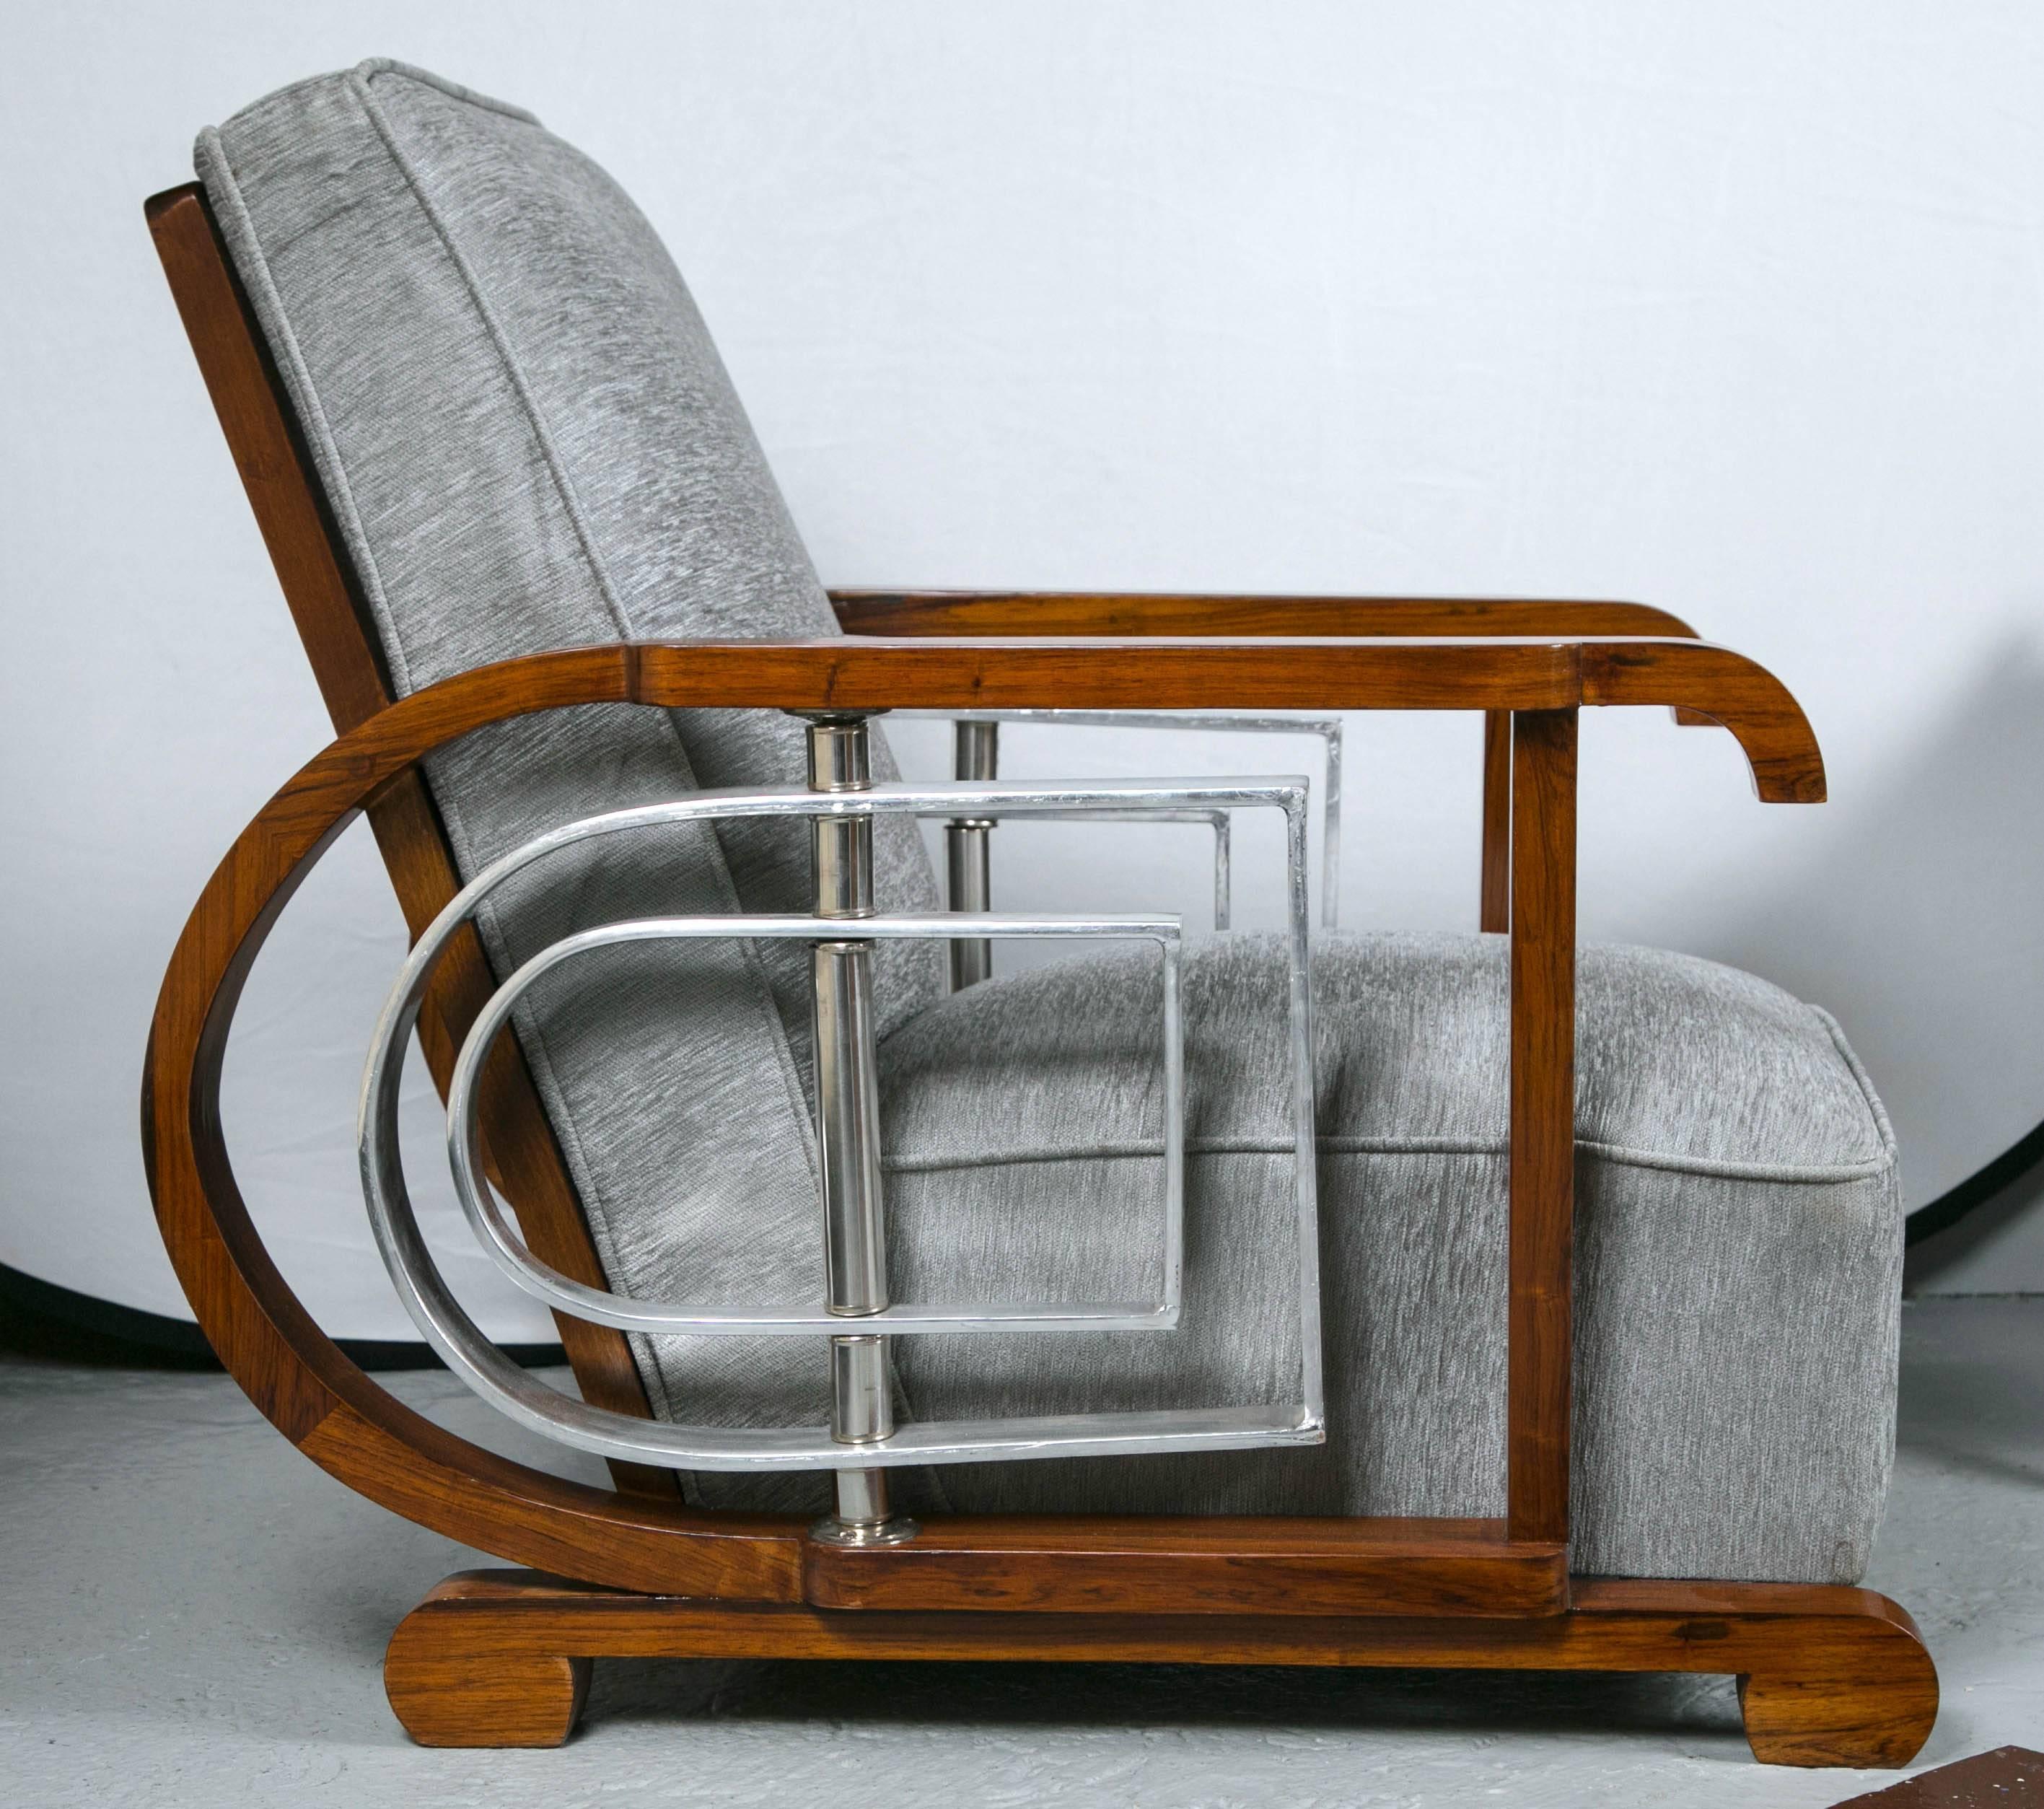 Pair of Mid-Century Modern Art Deco style lounge/ theater chairs. An outstanding set of 10 (two in this listing) Art Deco inspired lounge or theater chairs from the Mid-Century Modern era. Each having all new fabric with new cushions, back rest,